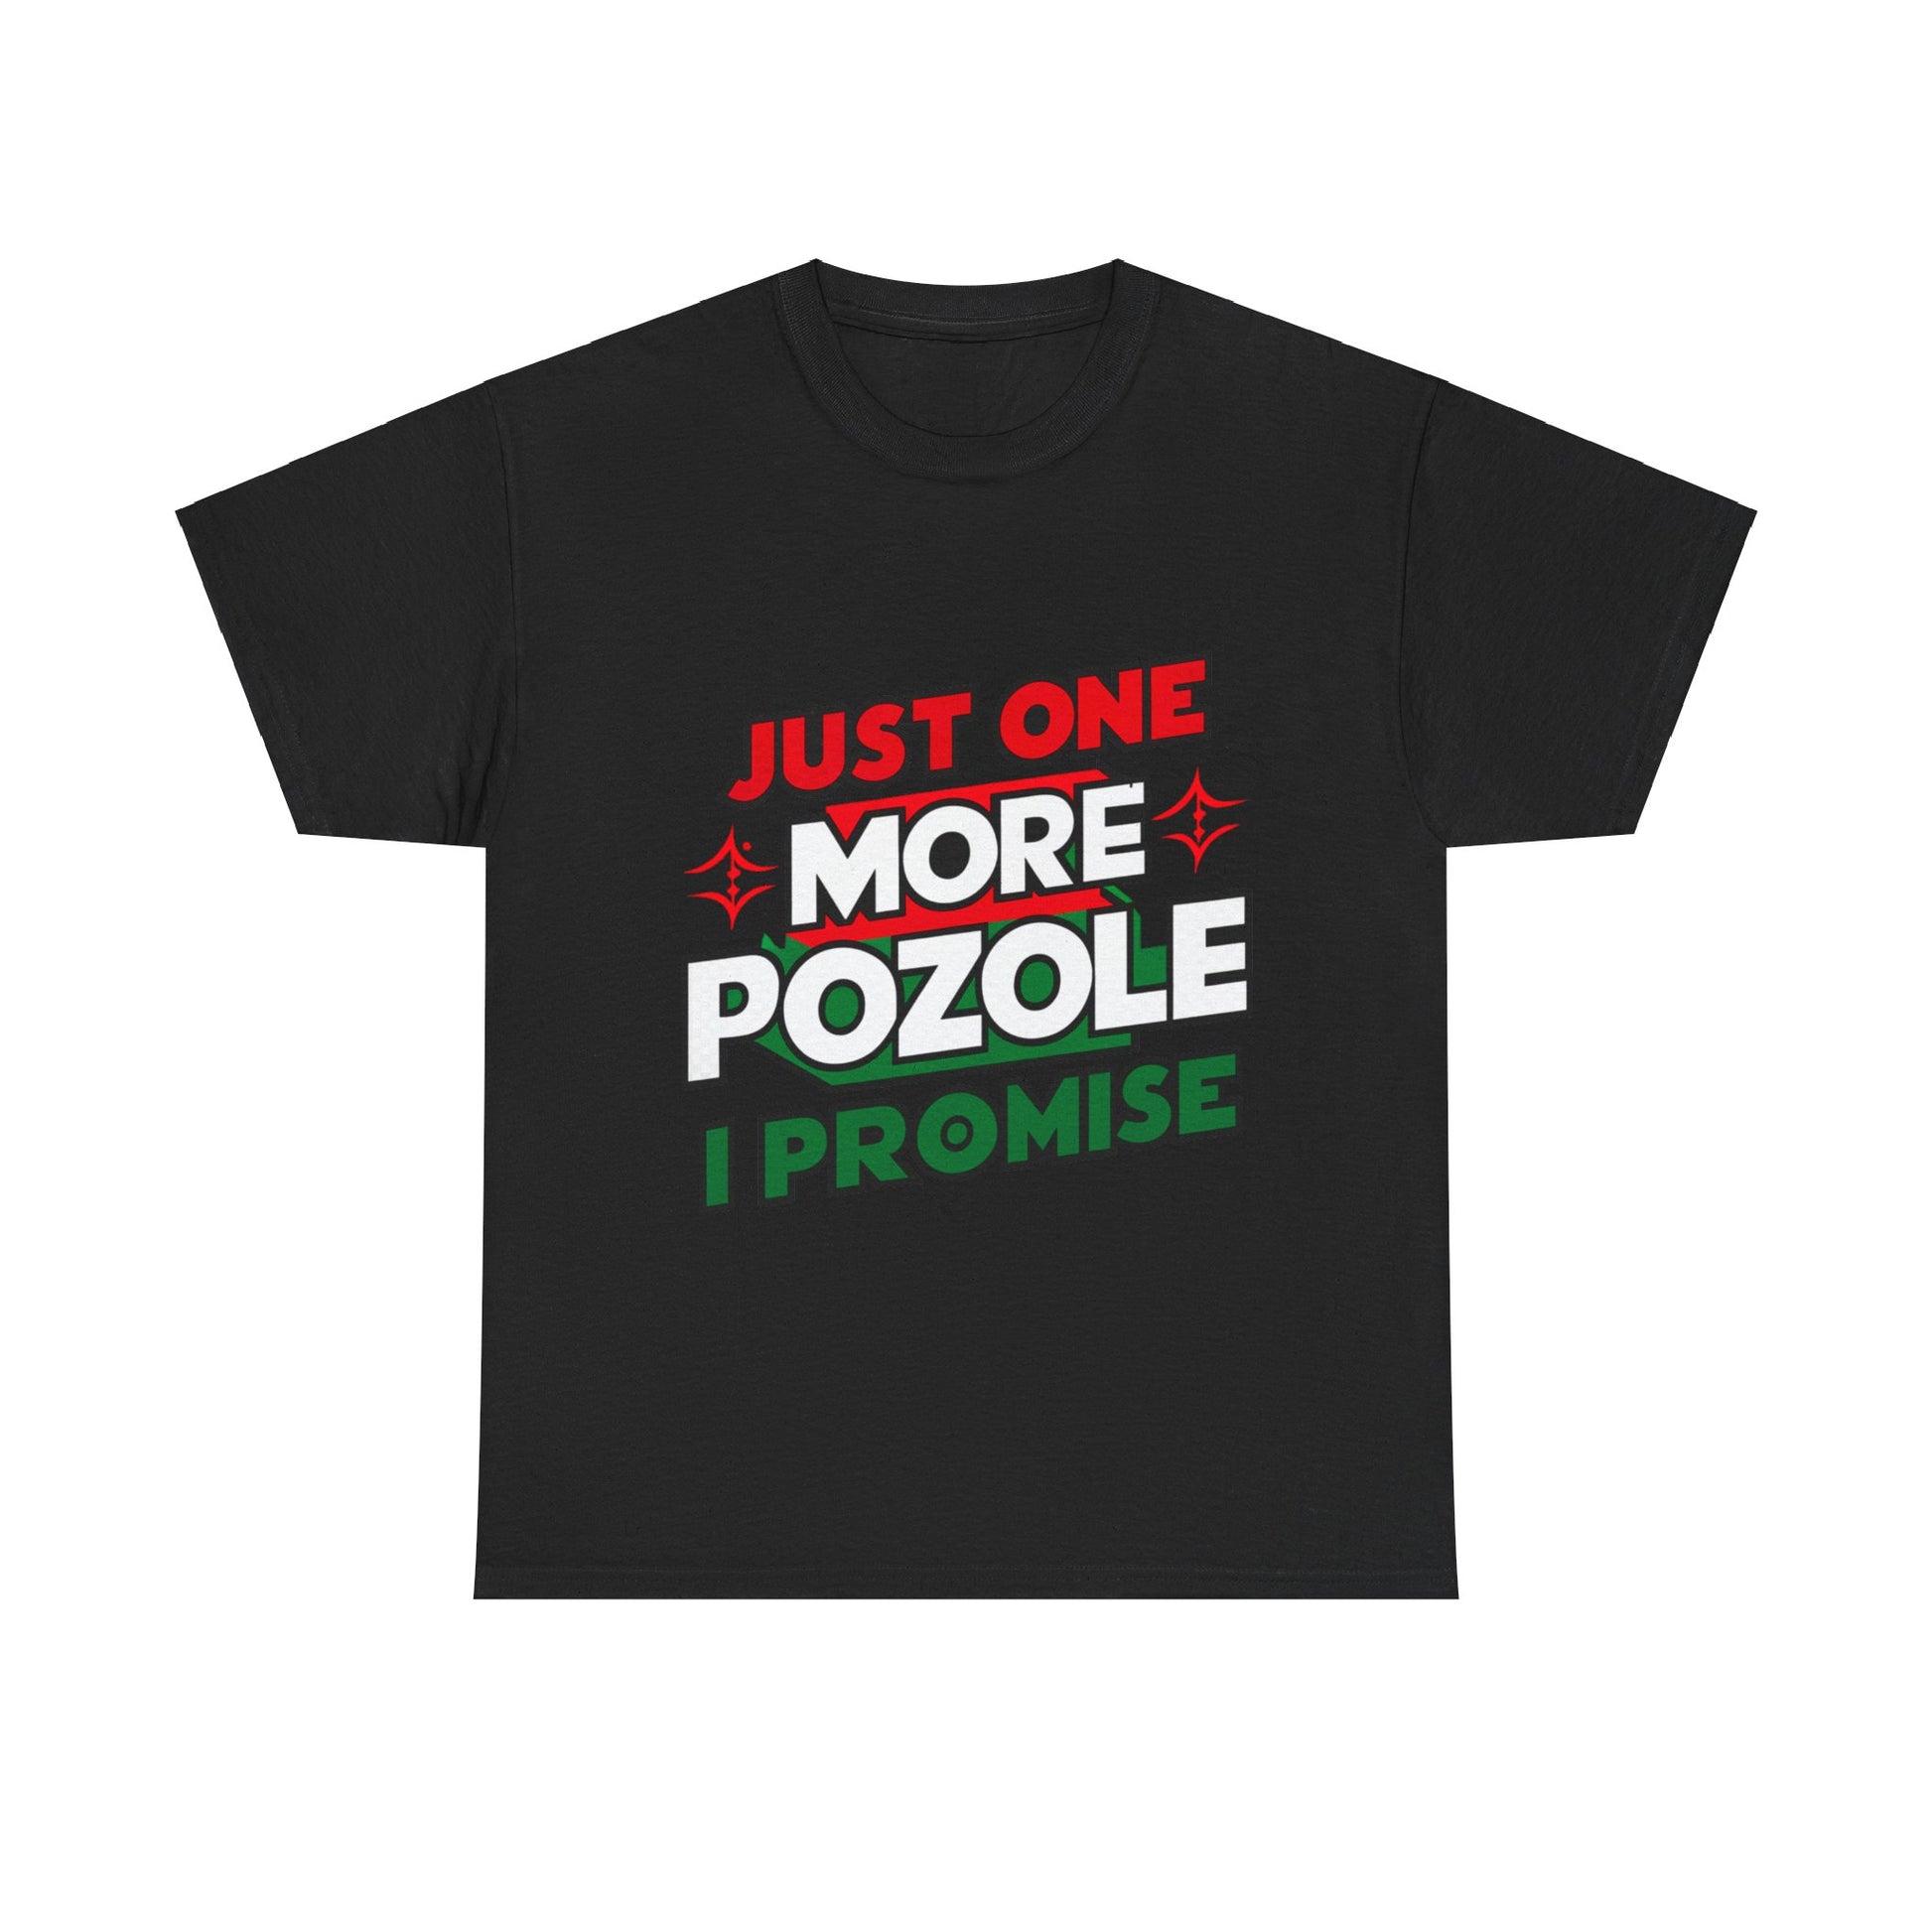 Just One More Pozole I Promise Mexican Food Graphic Unisex Heavy Cotton Tee Cotton Funny Humorous Graphic Soft Premium Unisex Men Women Black T-shirt Birthday Gift-1